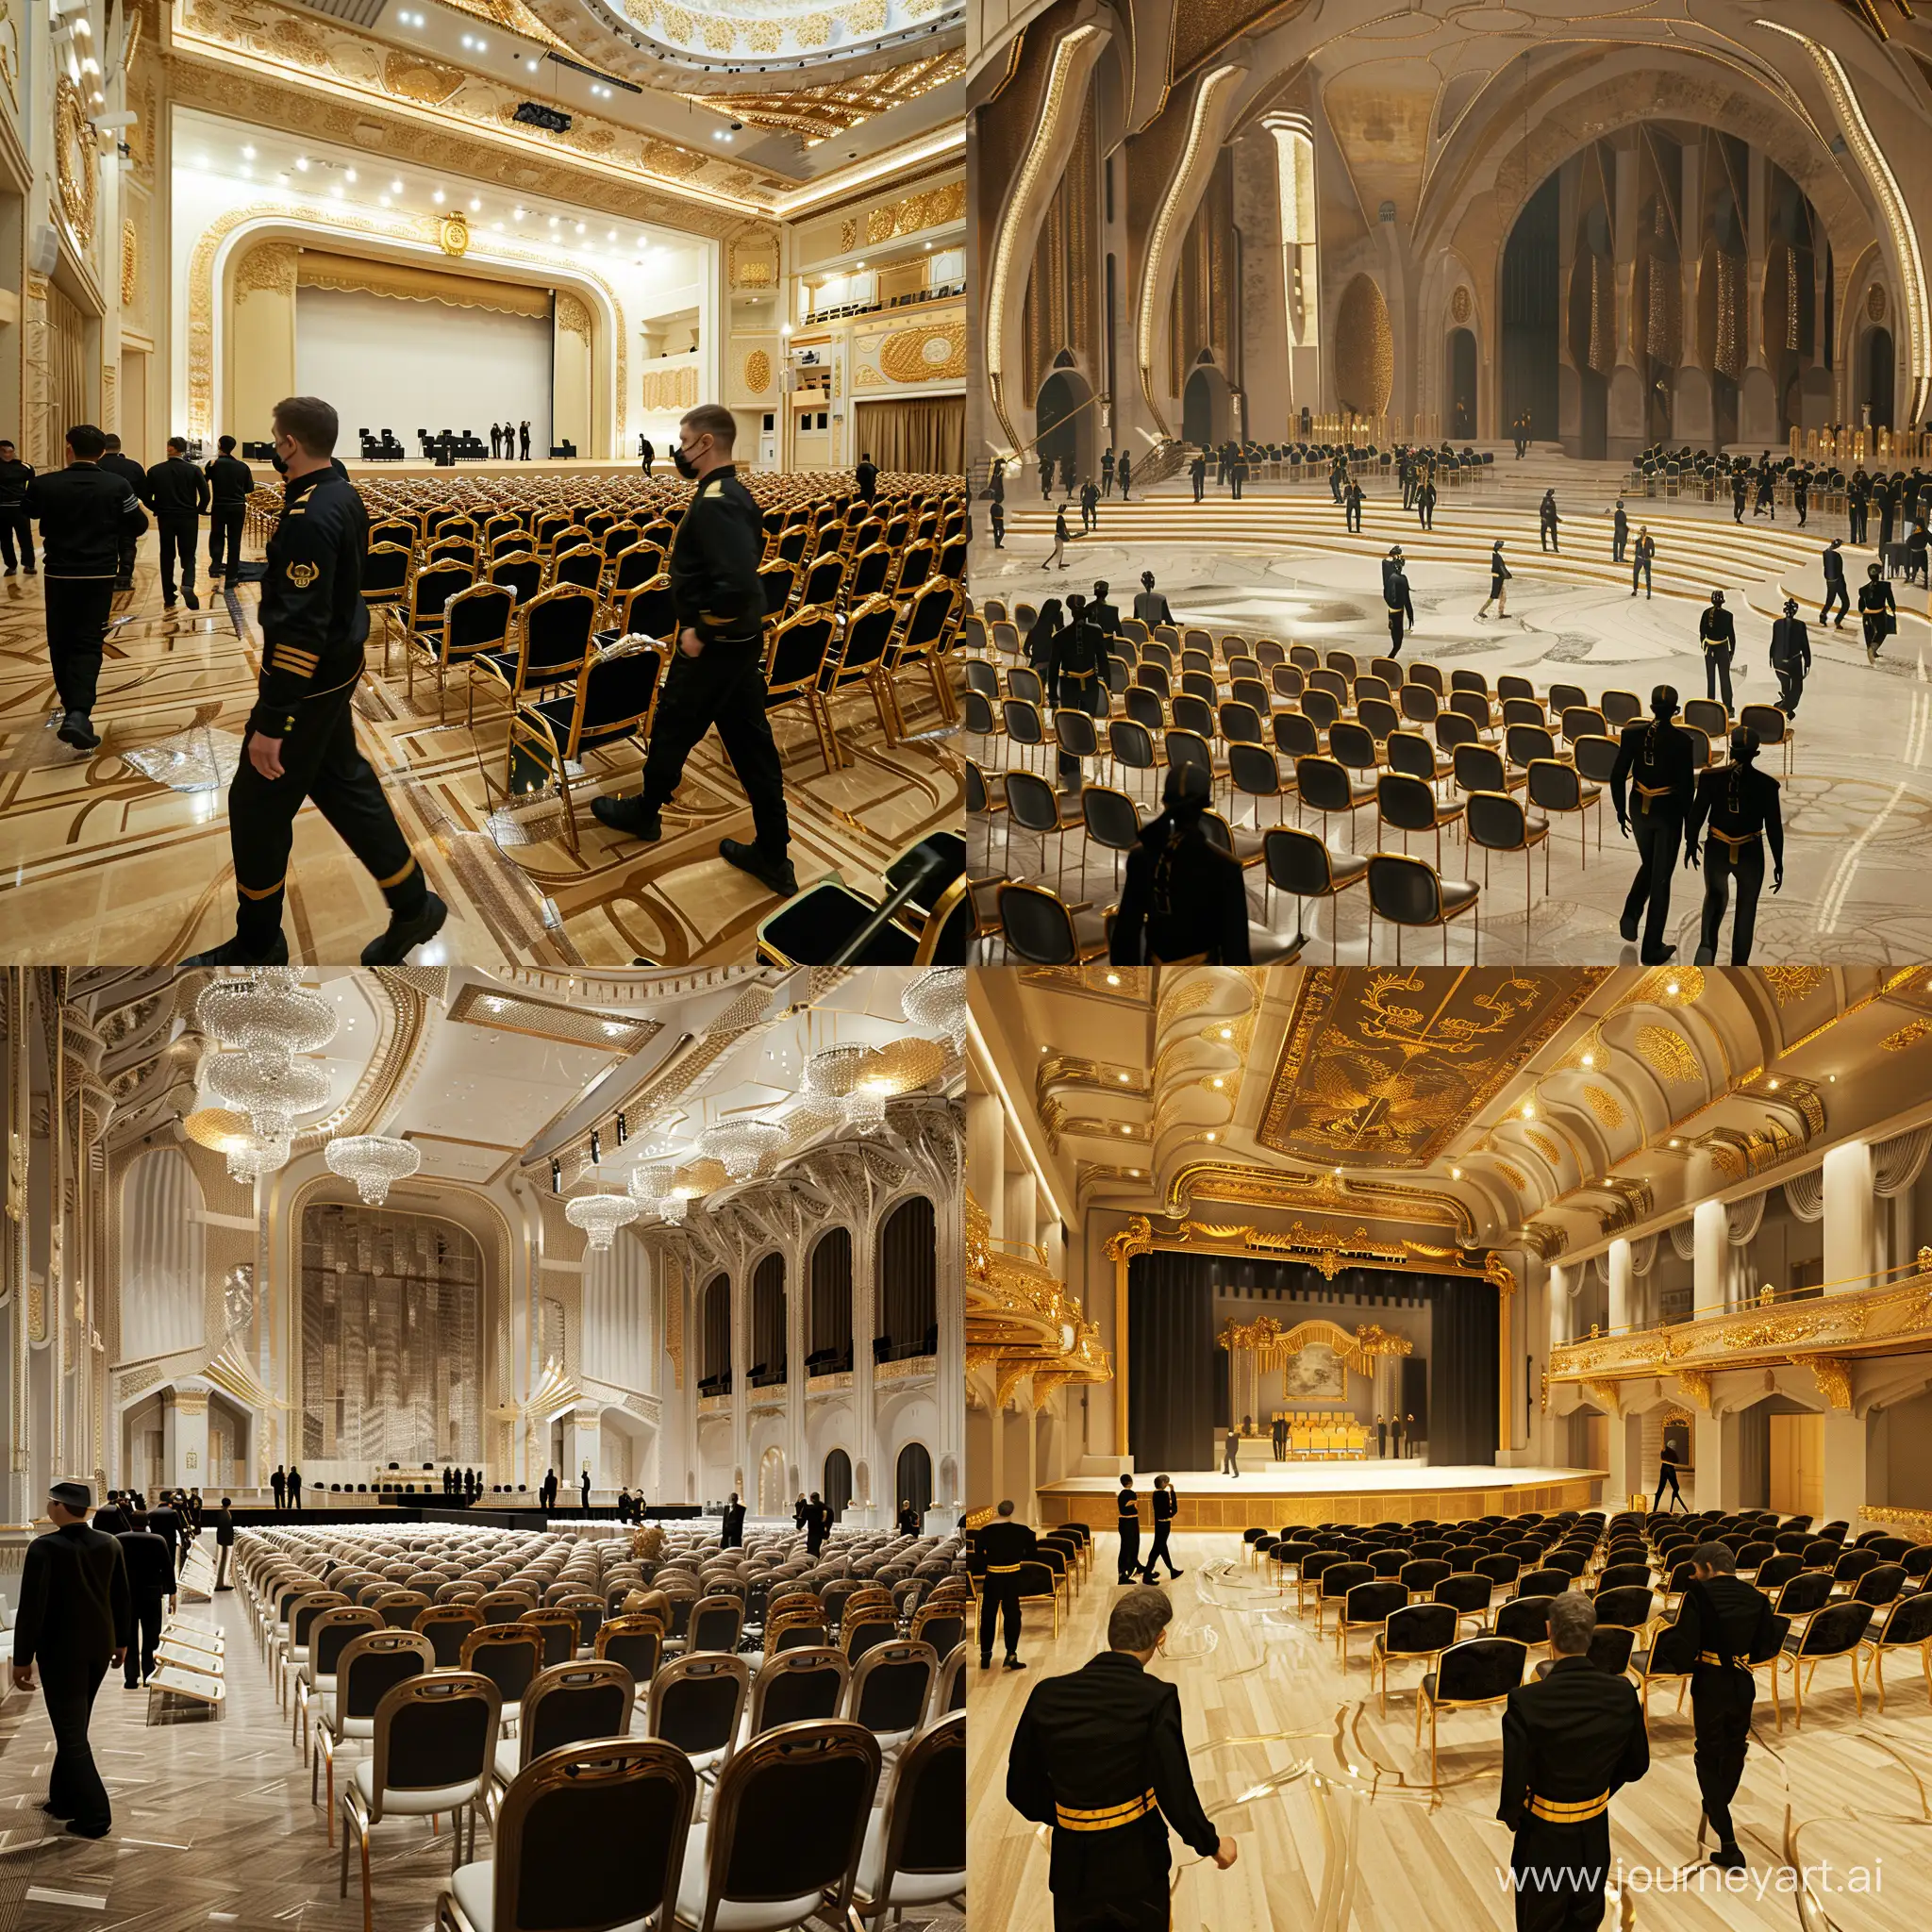 Elegant-Performance-Hall-with-Grand-Stage-and-Attendees-in-Black-and-Gold-Attire